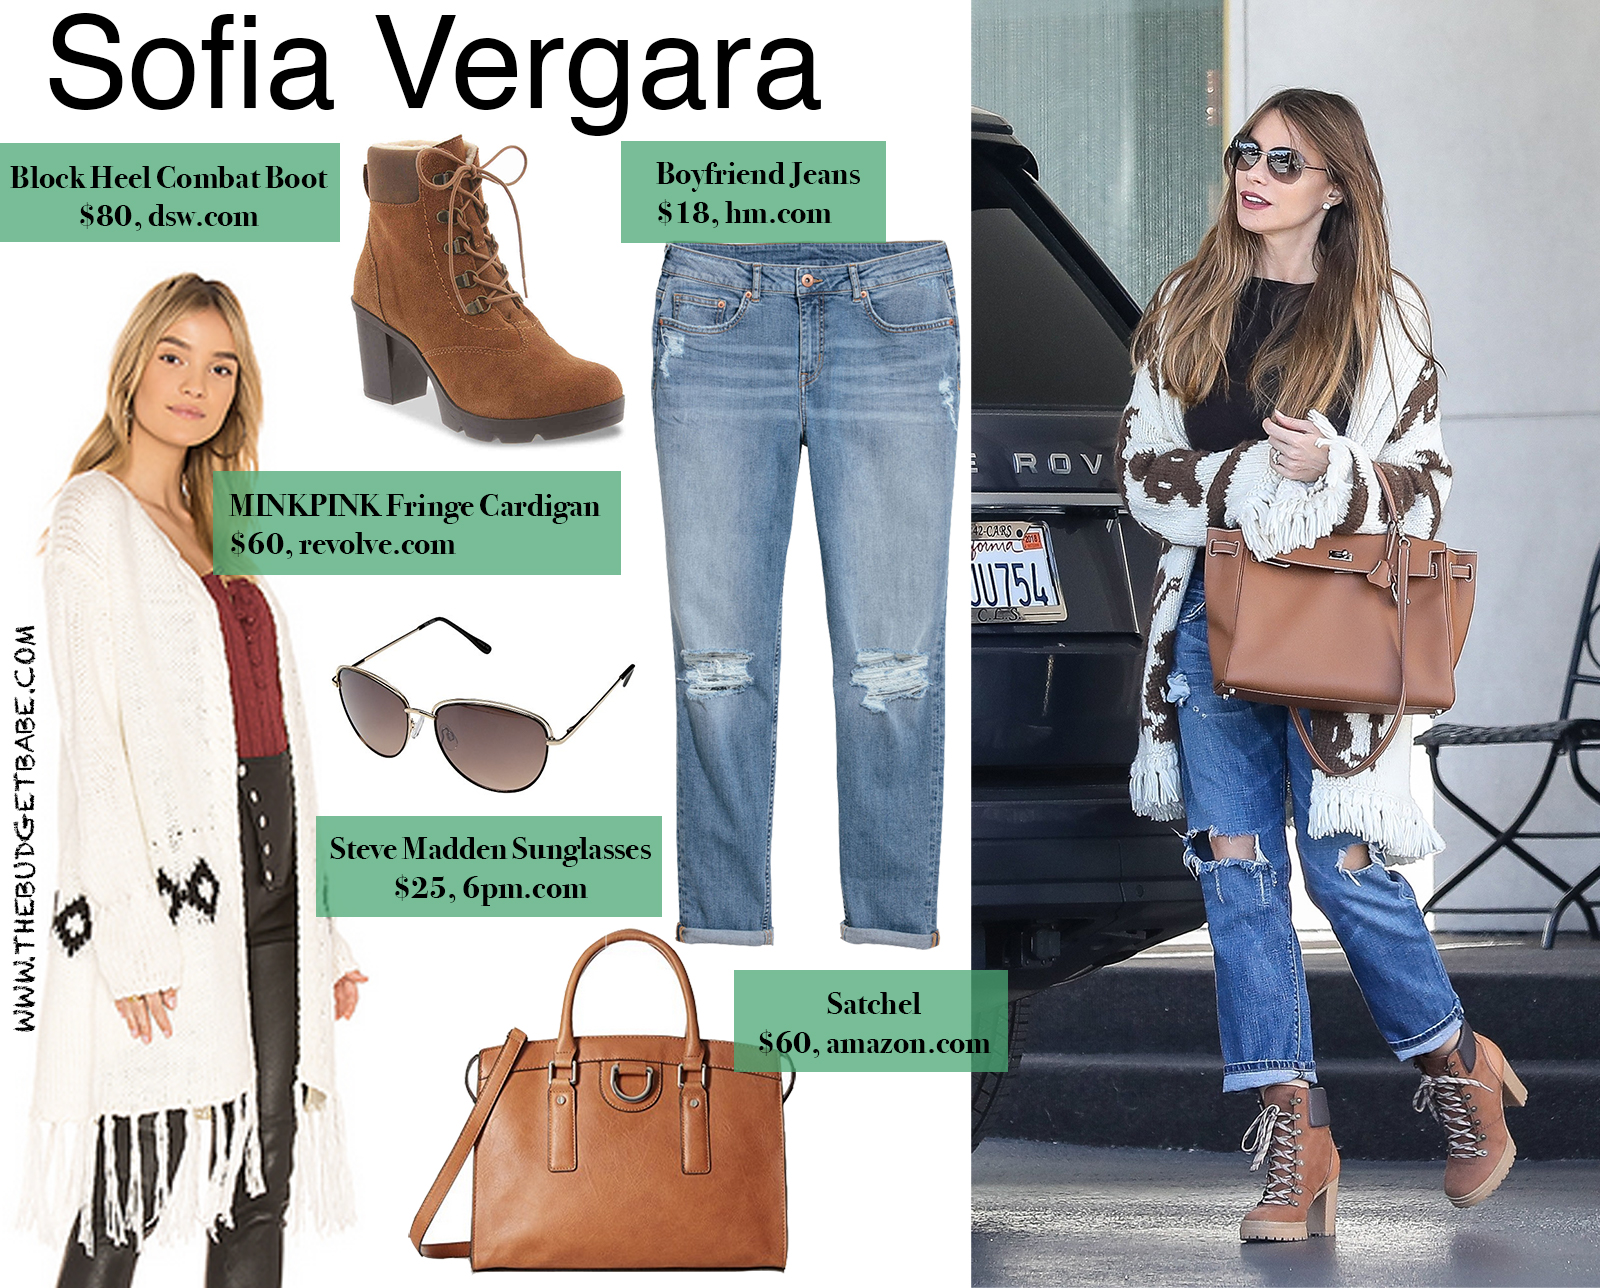 Sofia Vergara Fringe Cardigan and Heeled Combat Boots Look for Less